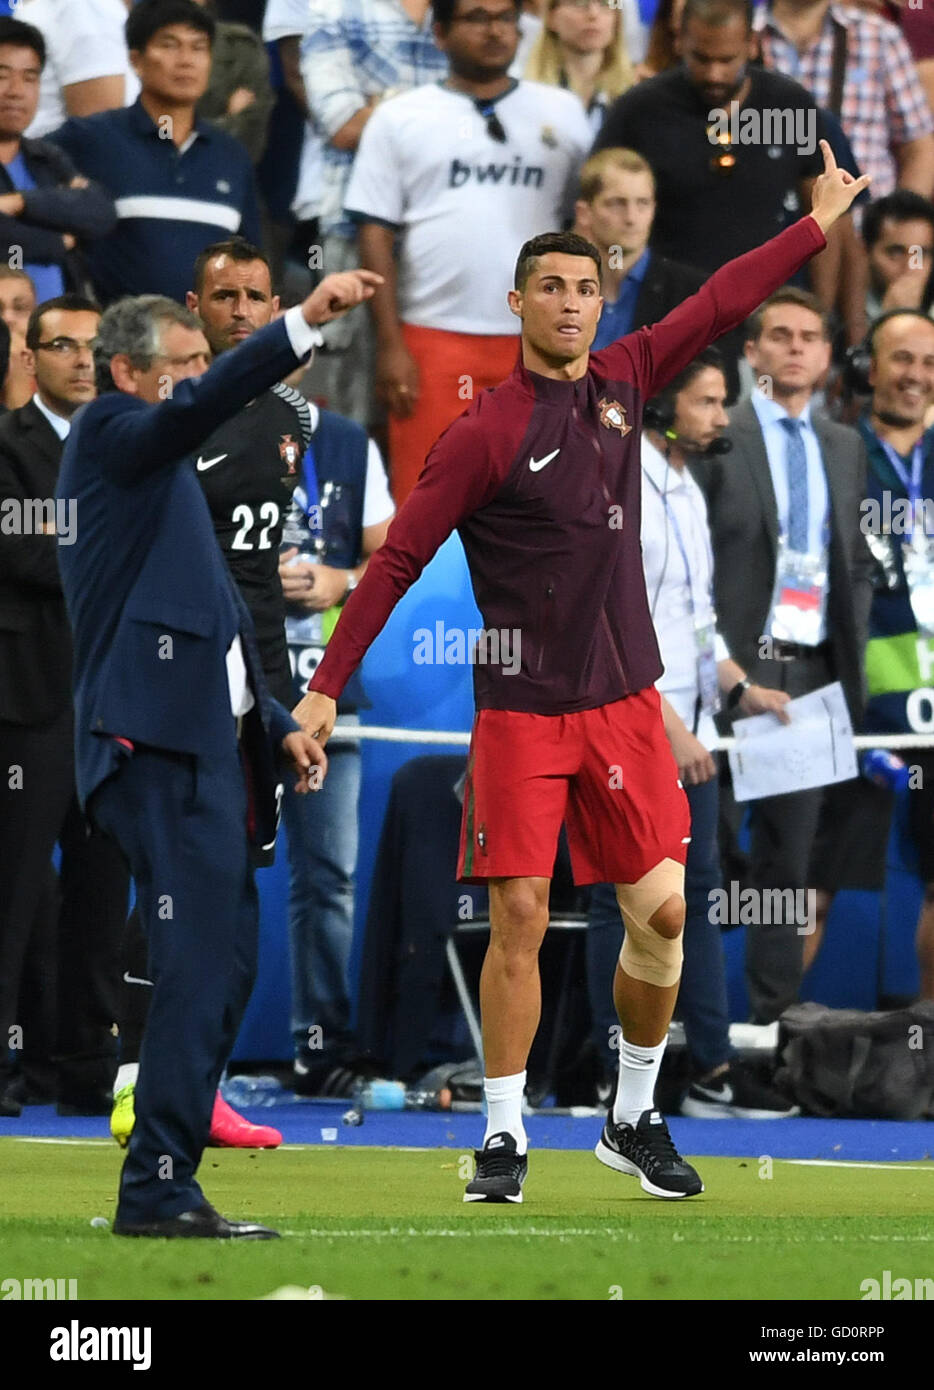 Saint Denis France 10th July 2016 Coach Fernando Santos L And Injured Cristiano Ronaldo Of Portugal Gesture On The Touch Line During The Uefa Euro 2016 Soccer Final Match Between Portugal And France At